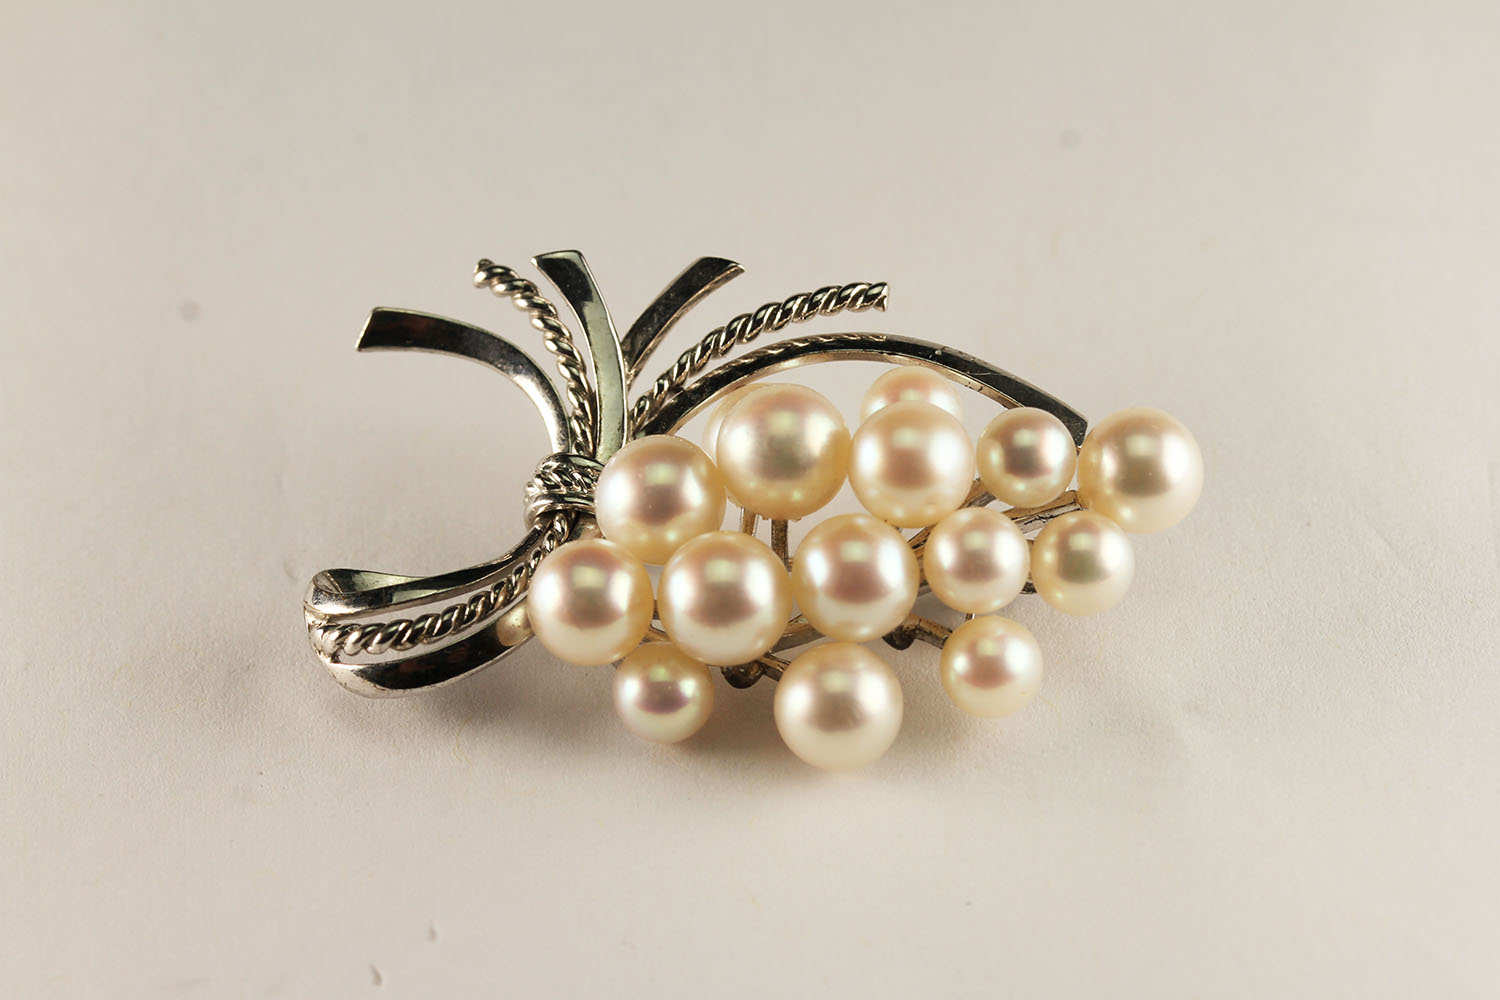 SILVER VINTAGE MIKIMOTO PEARL BROOCH, dimensions 45x25mms , set with 15 stones of various sizes